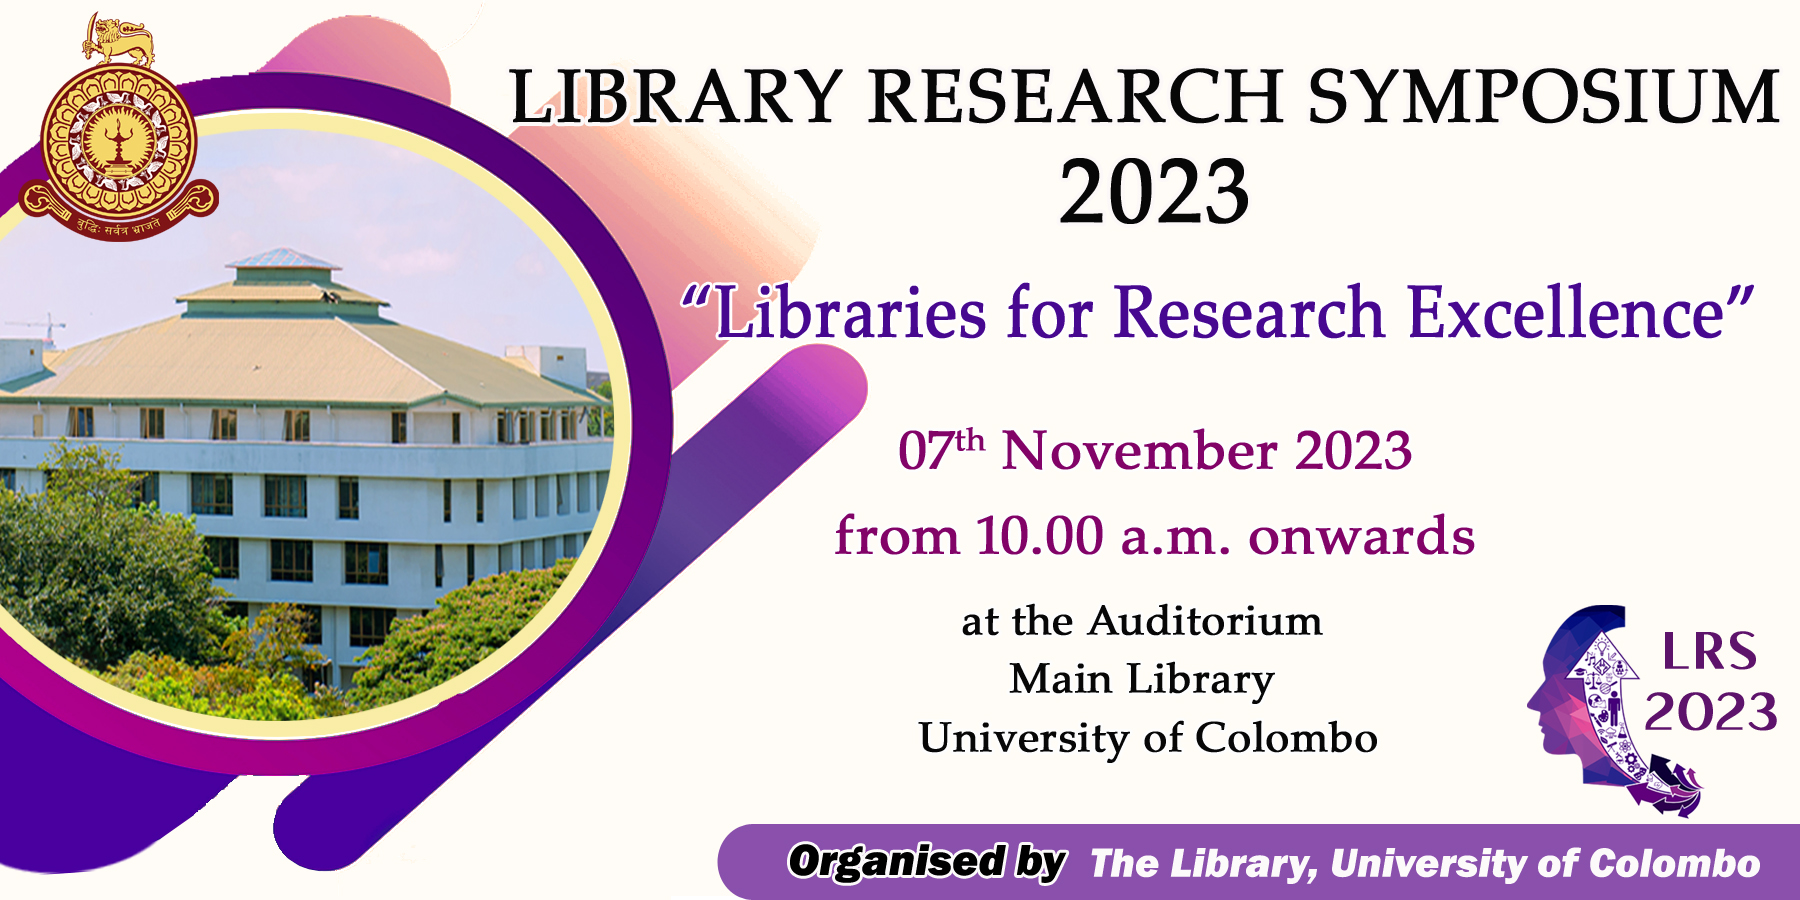 LIBRARY RESEARCH SYMPOSIUM- 2023